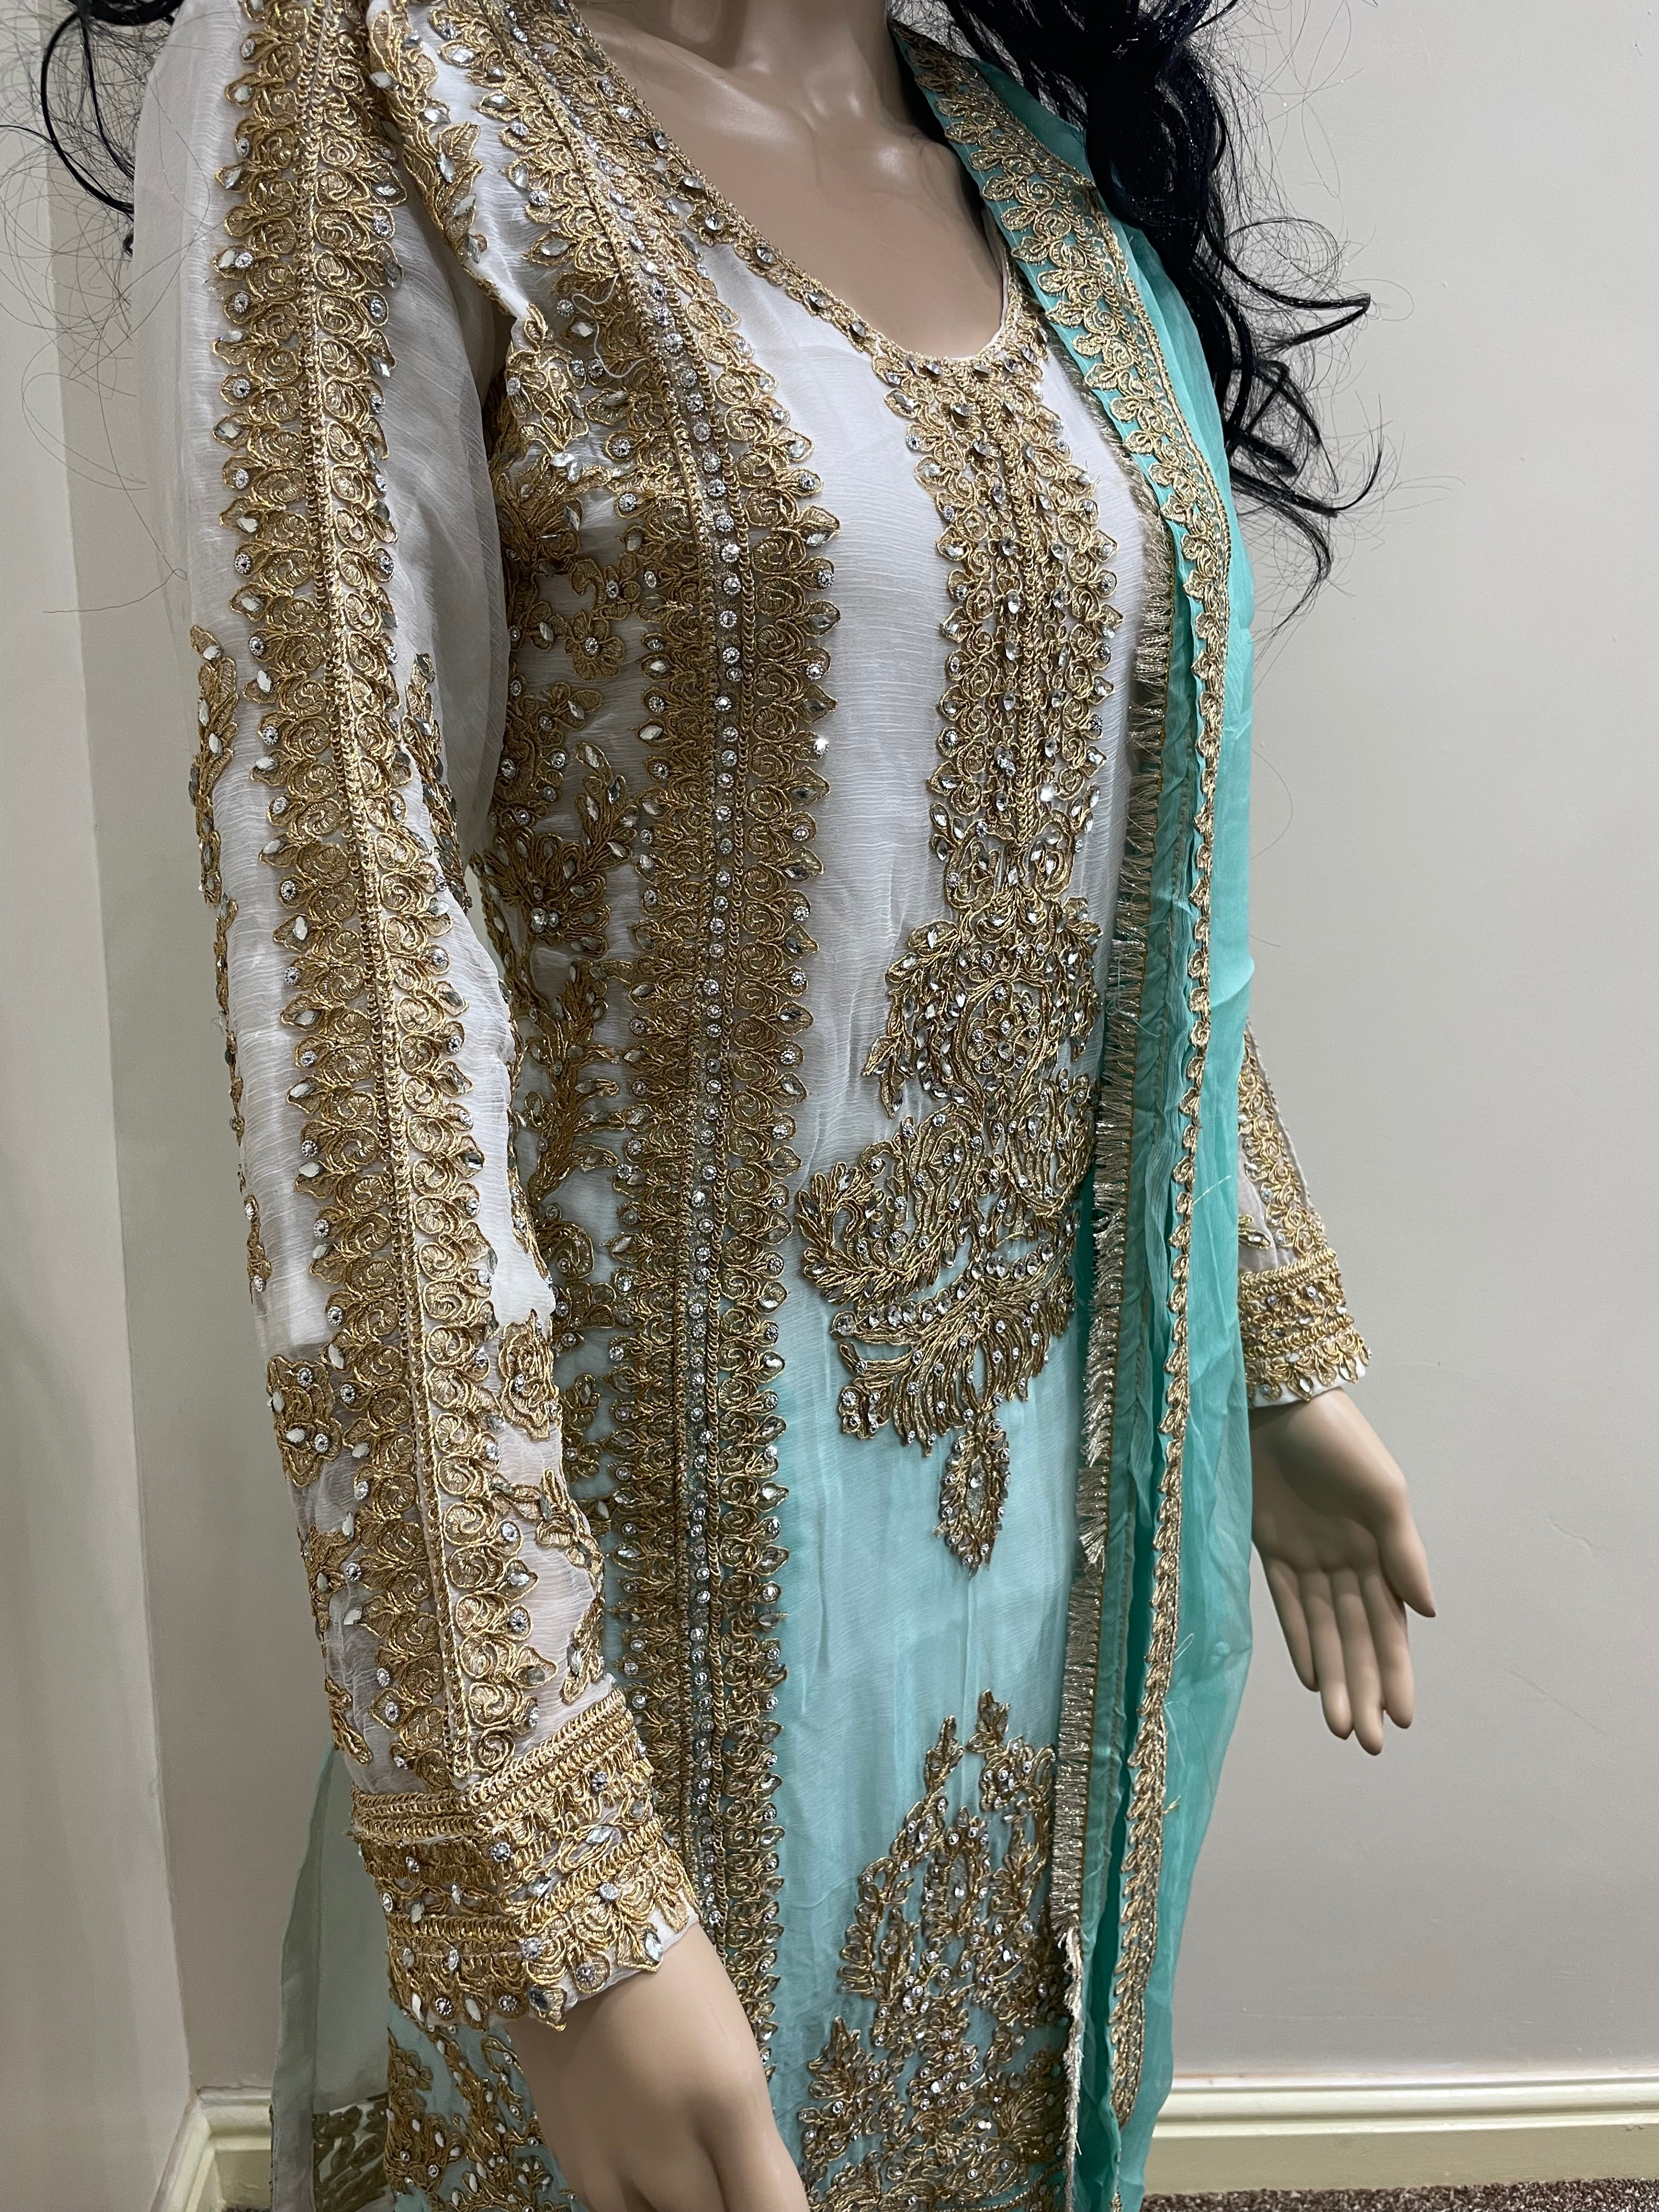 White and Turquoise Tie Dye Shalwar Kameez